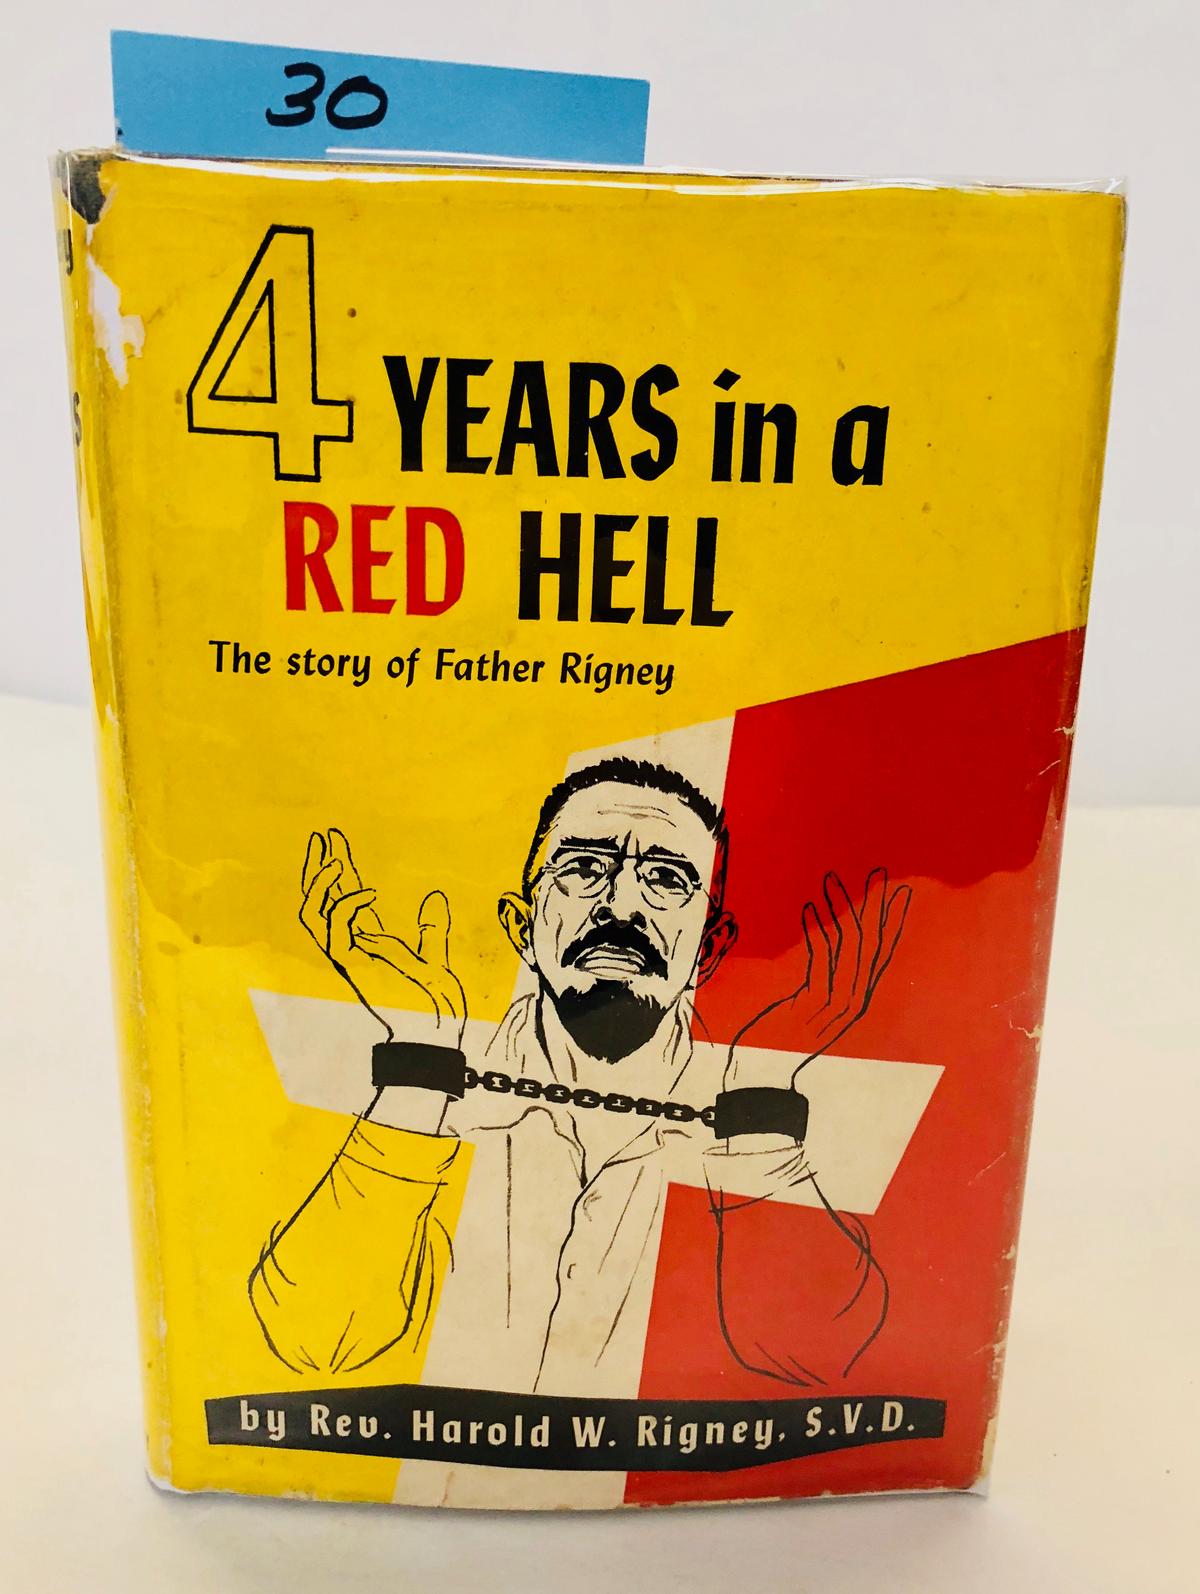 Four Years in a RED HELL (1956) by Rev. Harold Rigney SIGNED - Arrested in Communist CHINA